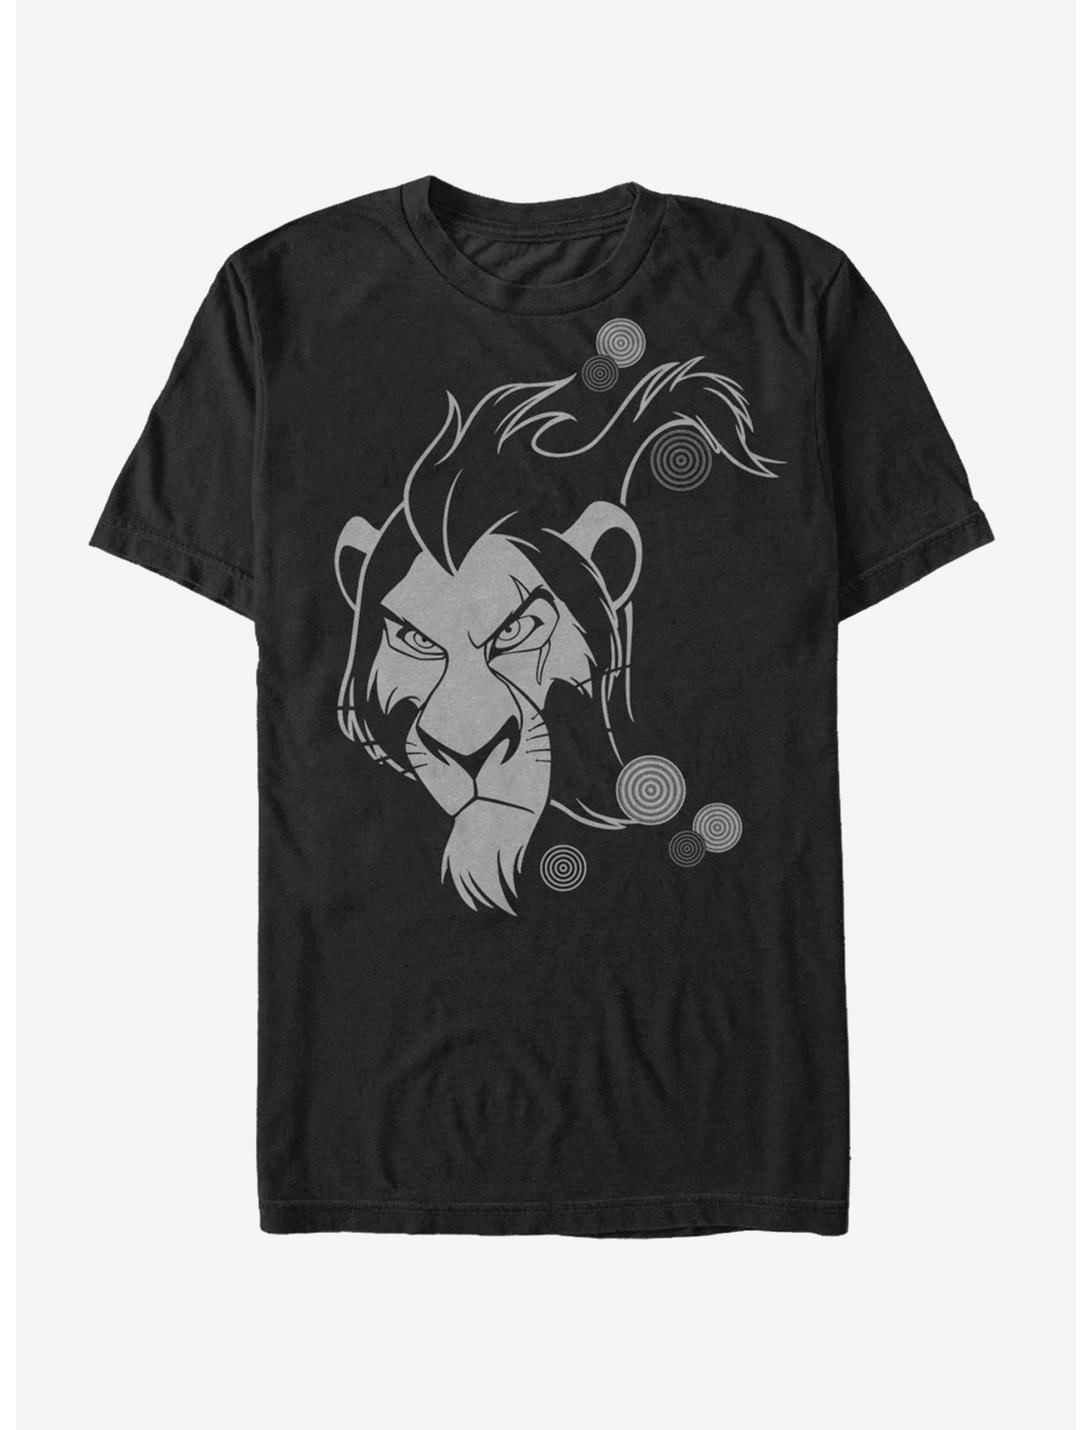 Lion King Scar Angry Stare T-Shirt, BLACK, hi-res